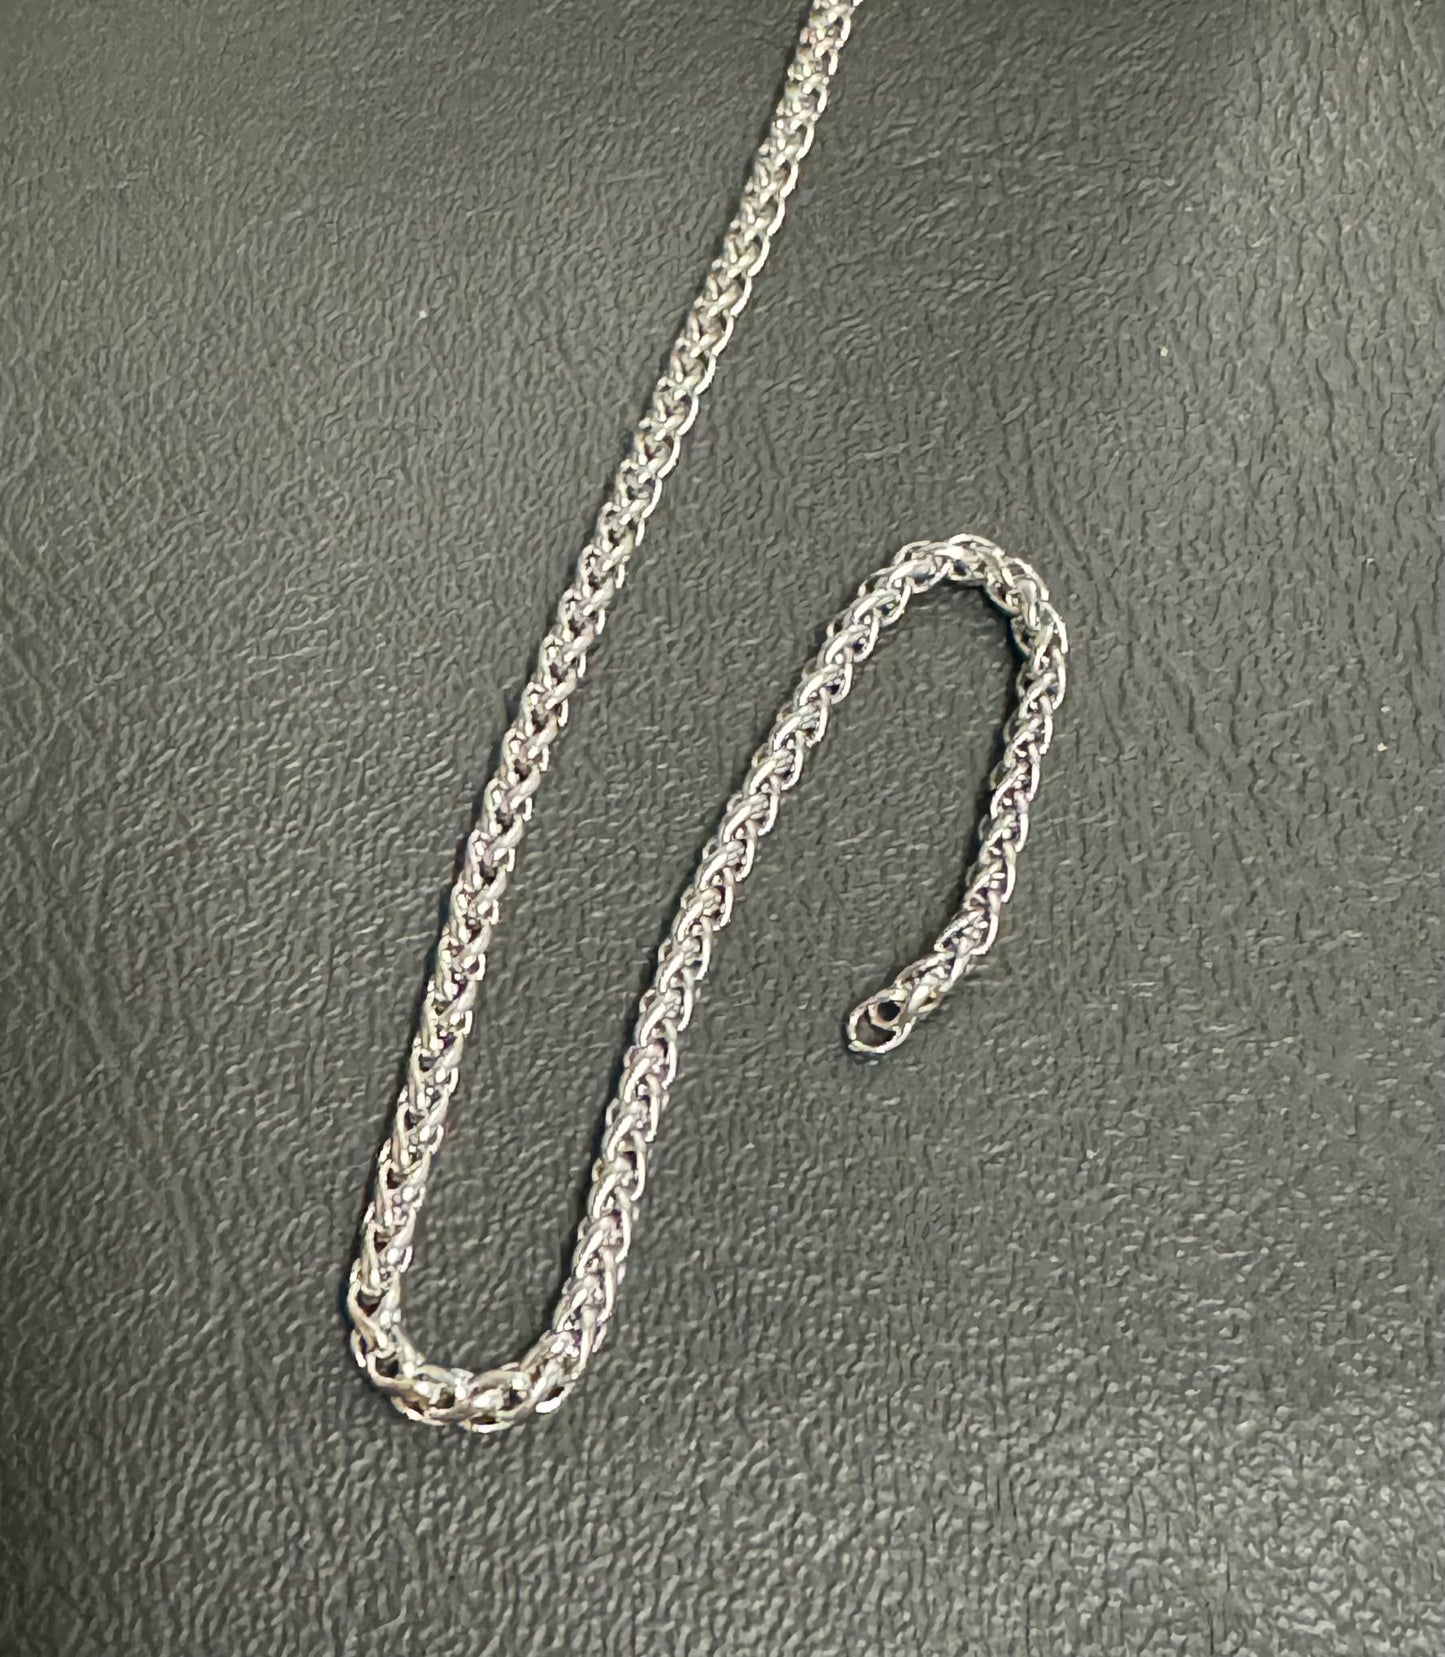 Braided Stainless Steel Chain